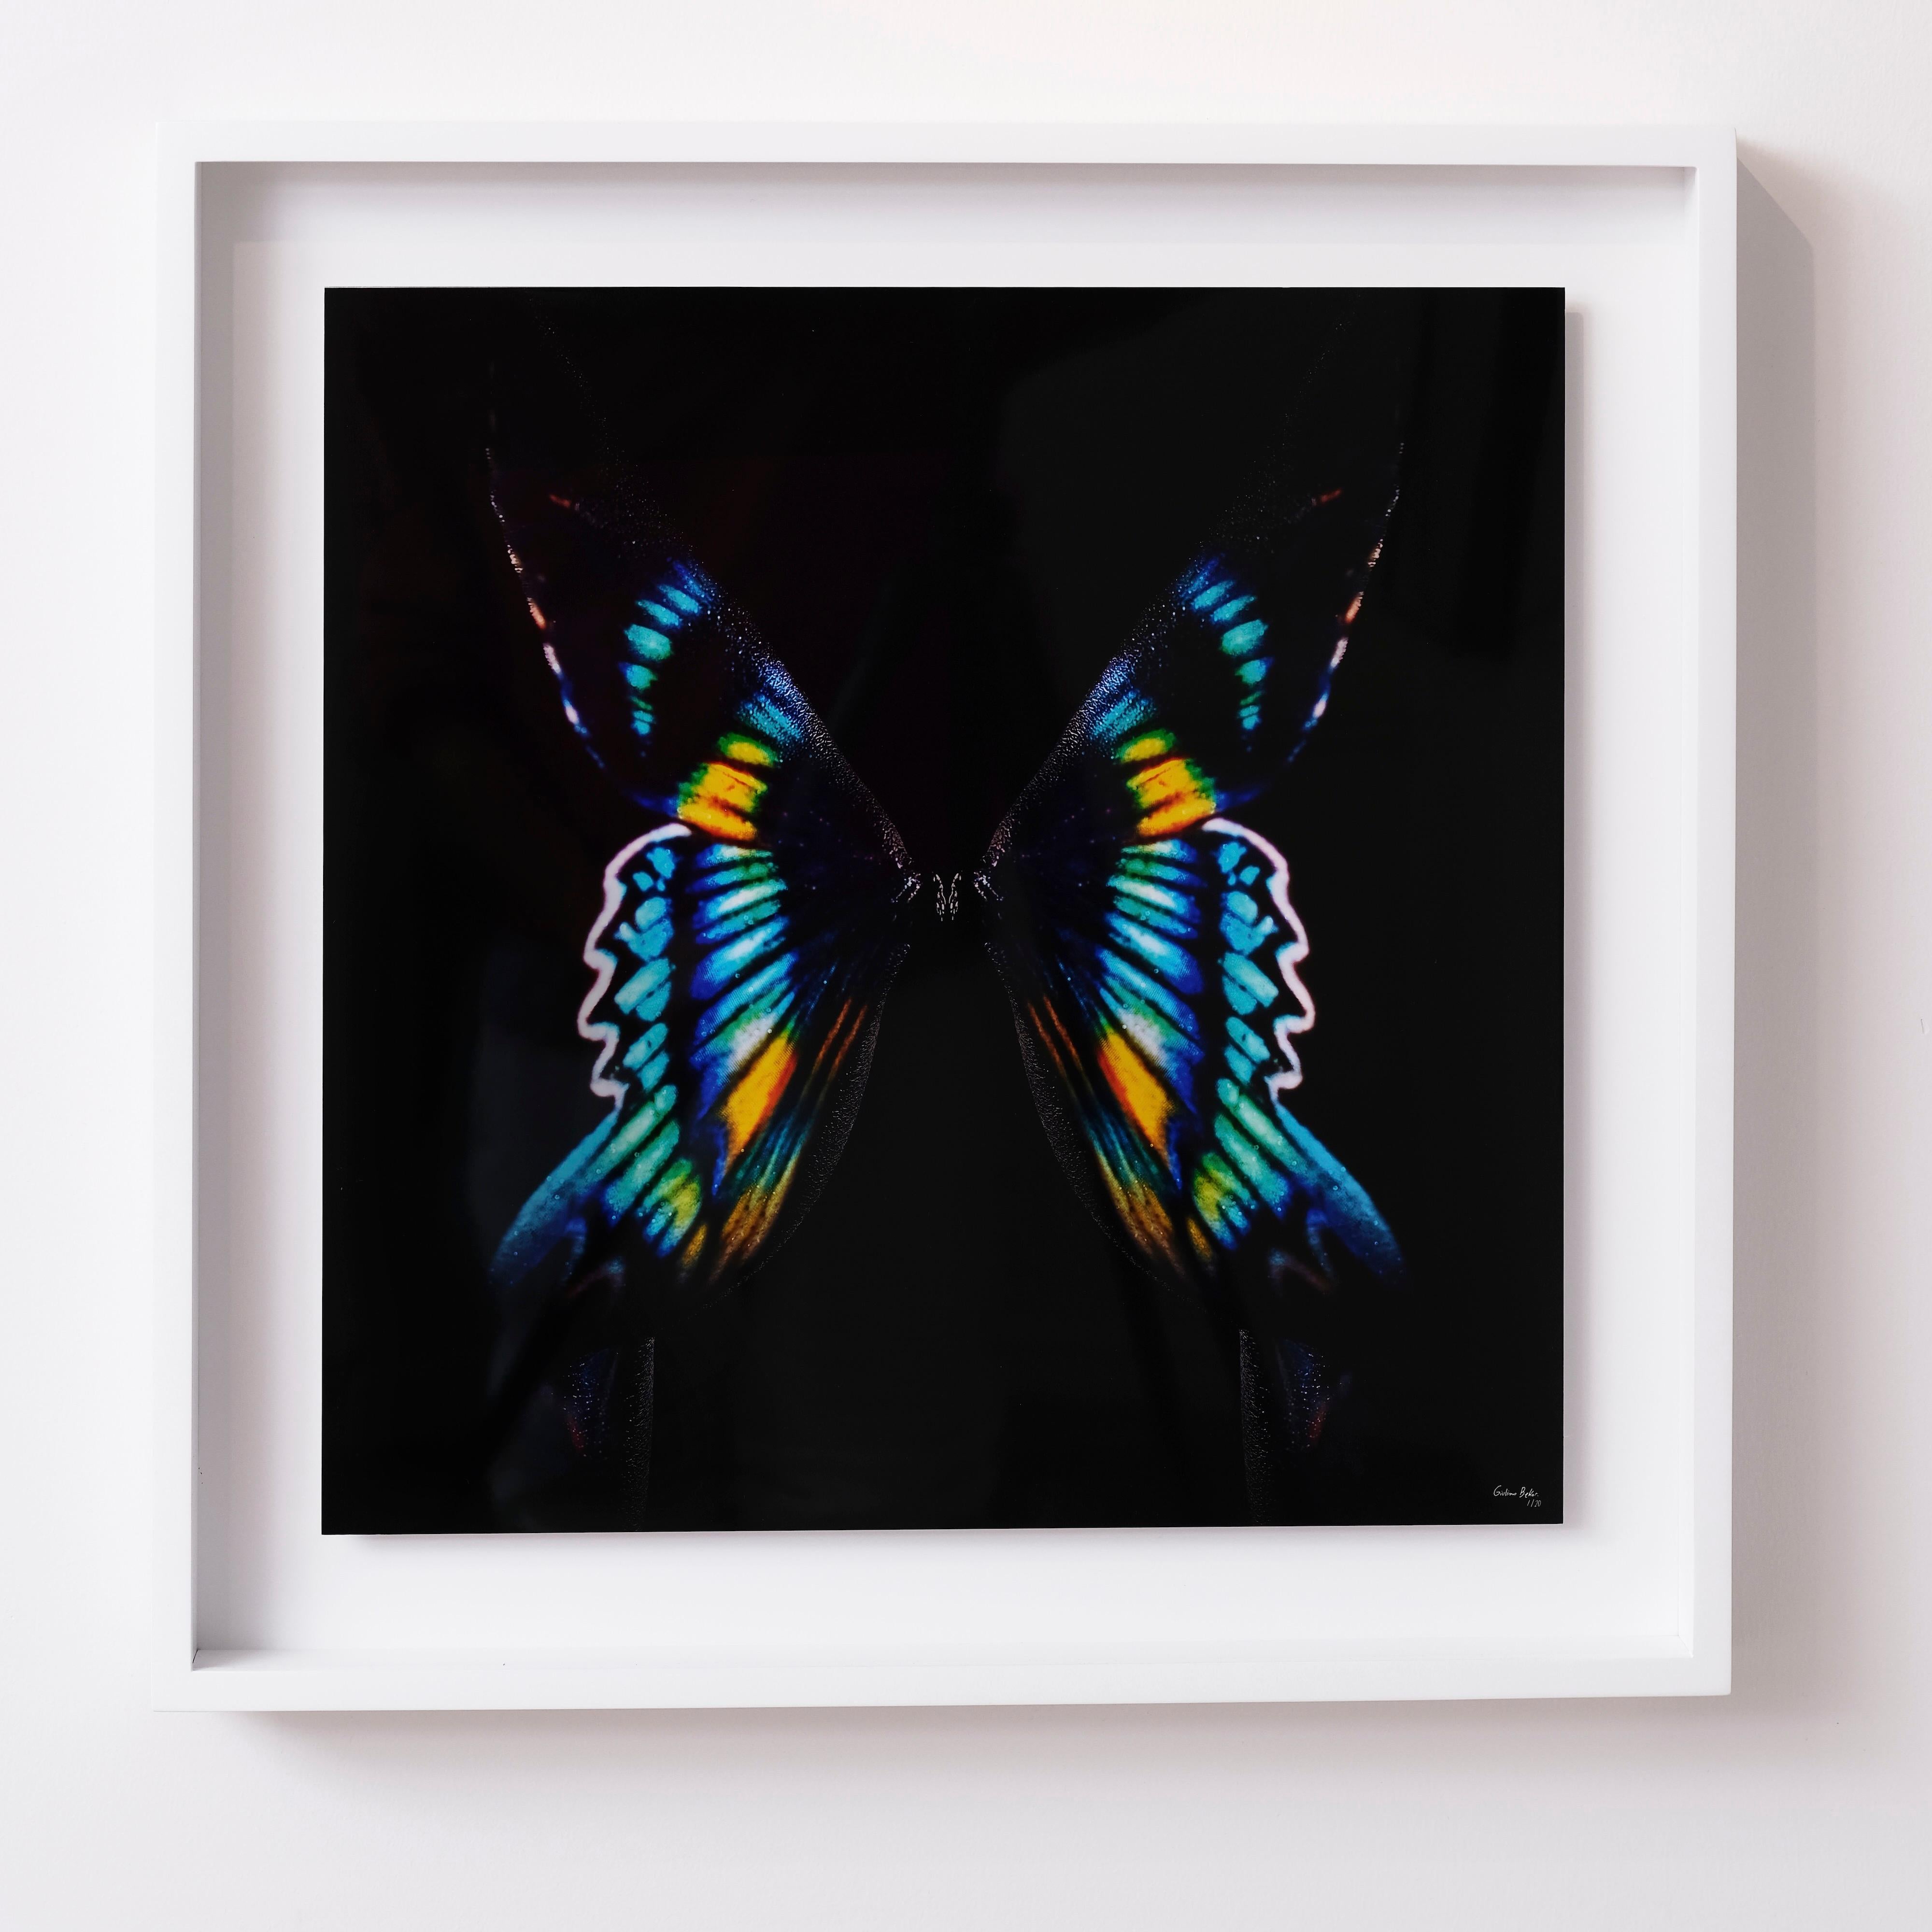 "Butterfly 8" (FRAMED) Photography 16" x 16" in Edition 1/20 by Giuliano Bekor

Title: Butterfly B12
Year: 2018
Print size: 16" x 16" Inch
Framed size: 20" x 20" Inch 
Edition: 1/20
Artist proof: 2

Medium:  
Archival fine art Fujiflex print on